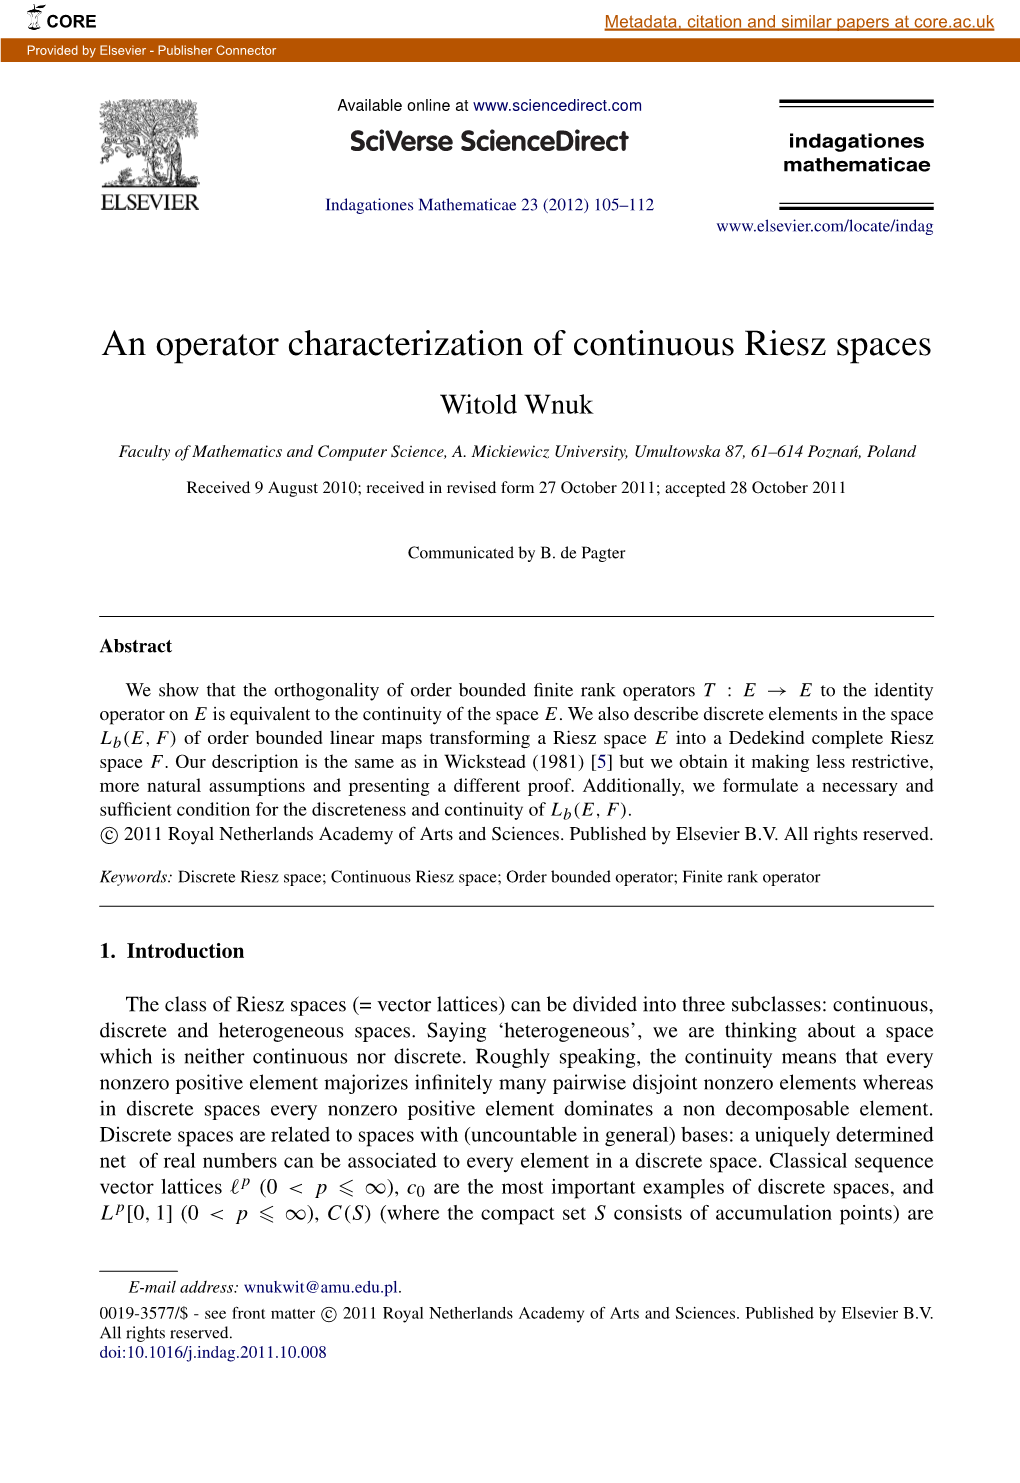 An Operator Characterization of Continuous Riesz Spaces